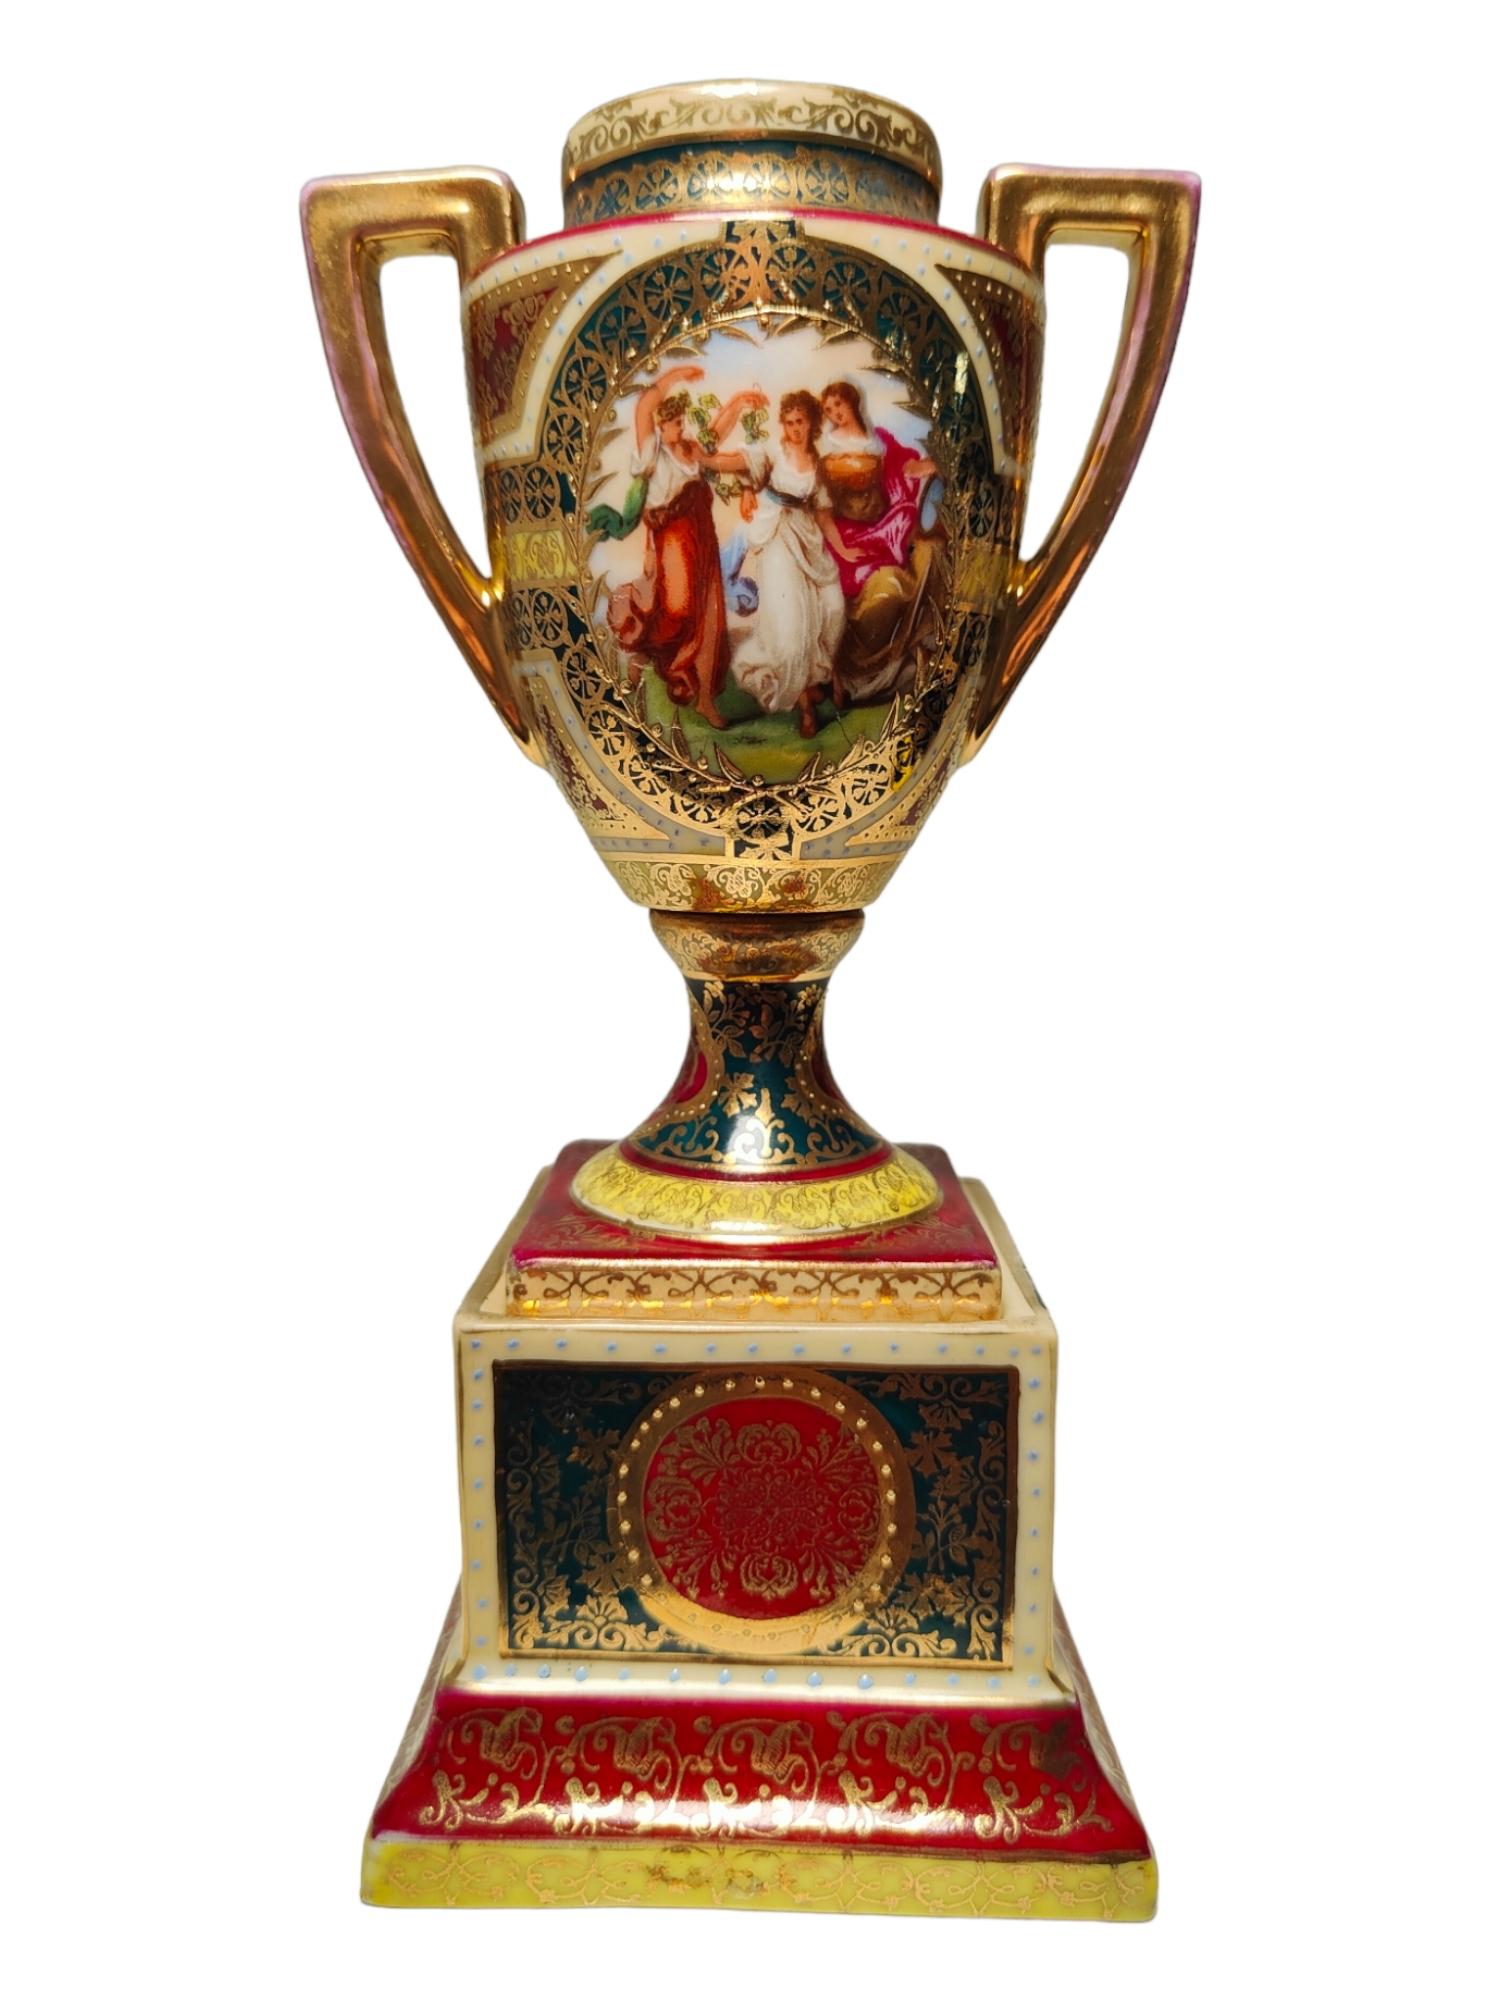 Small Austrian porcelain vase from the 19th century.
Ancient porcelain vase entirely hand painted and gilt with gold from the XIX century of Austria, in good condition. Measures: 20x8x8 cm.